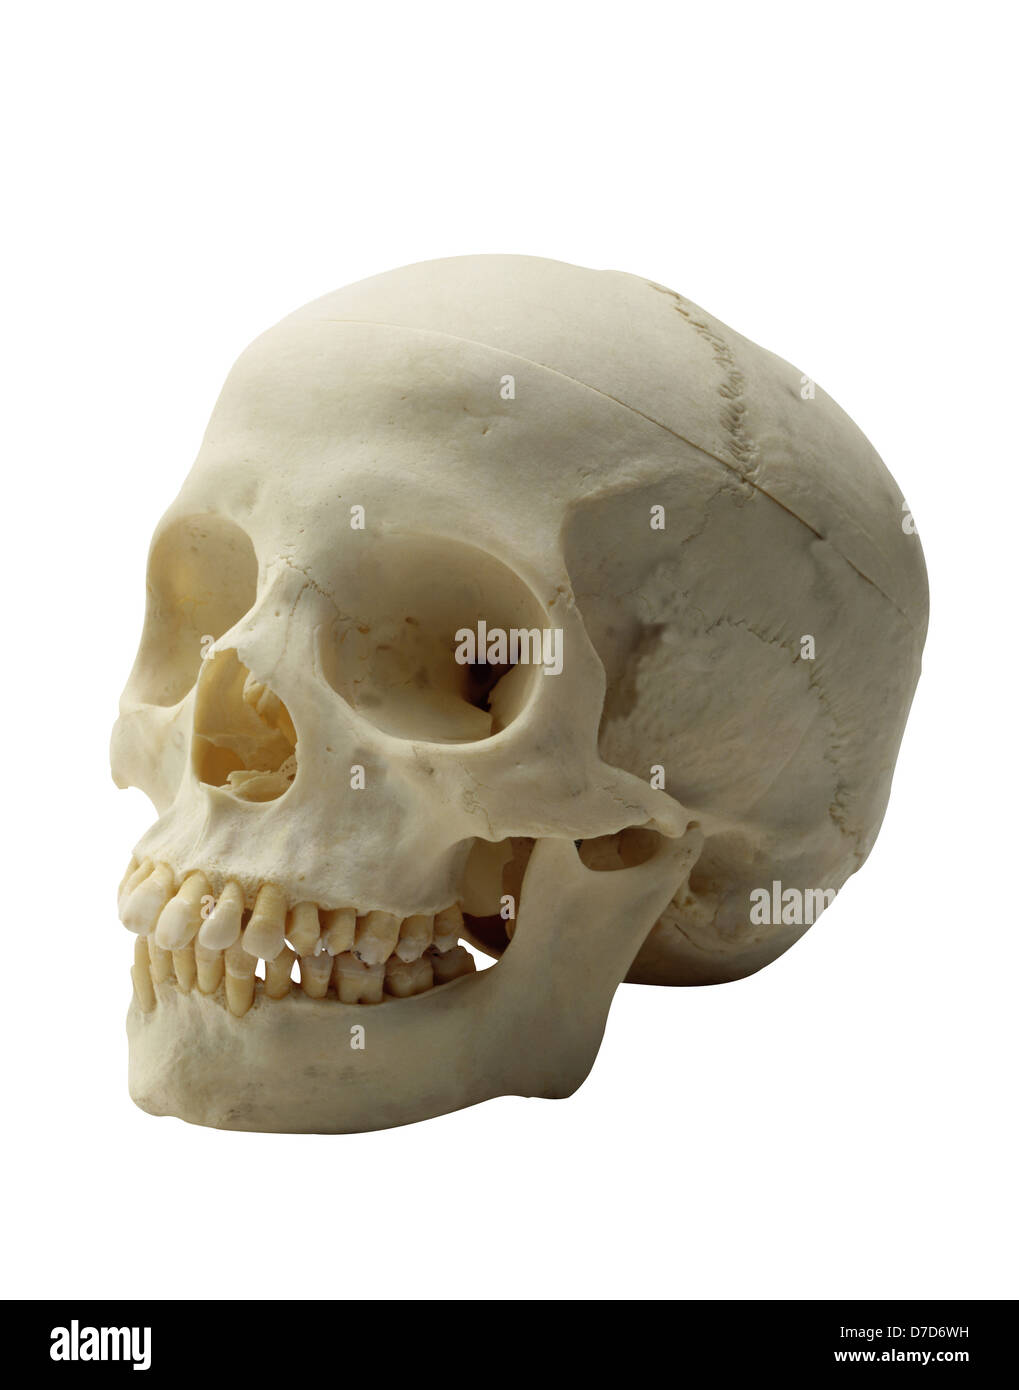 Human skull with teeth on white. Stock Photo